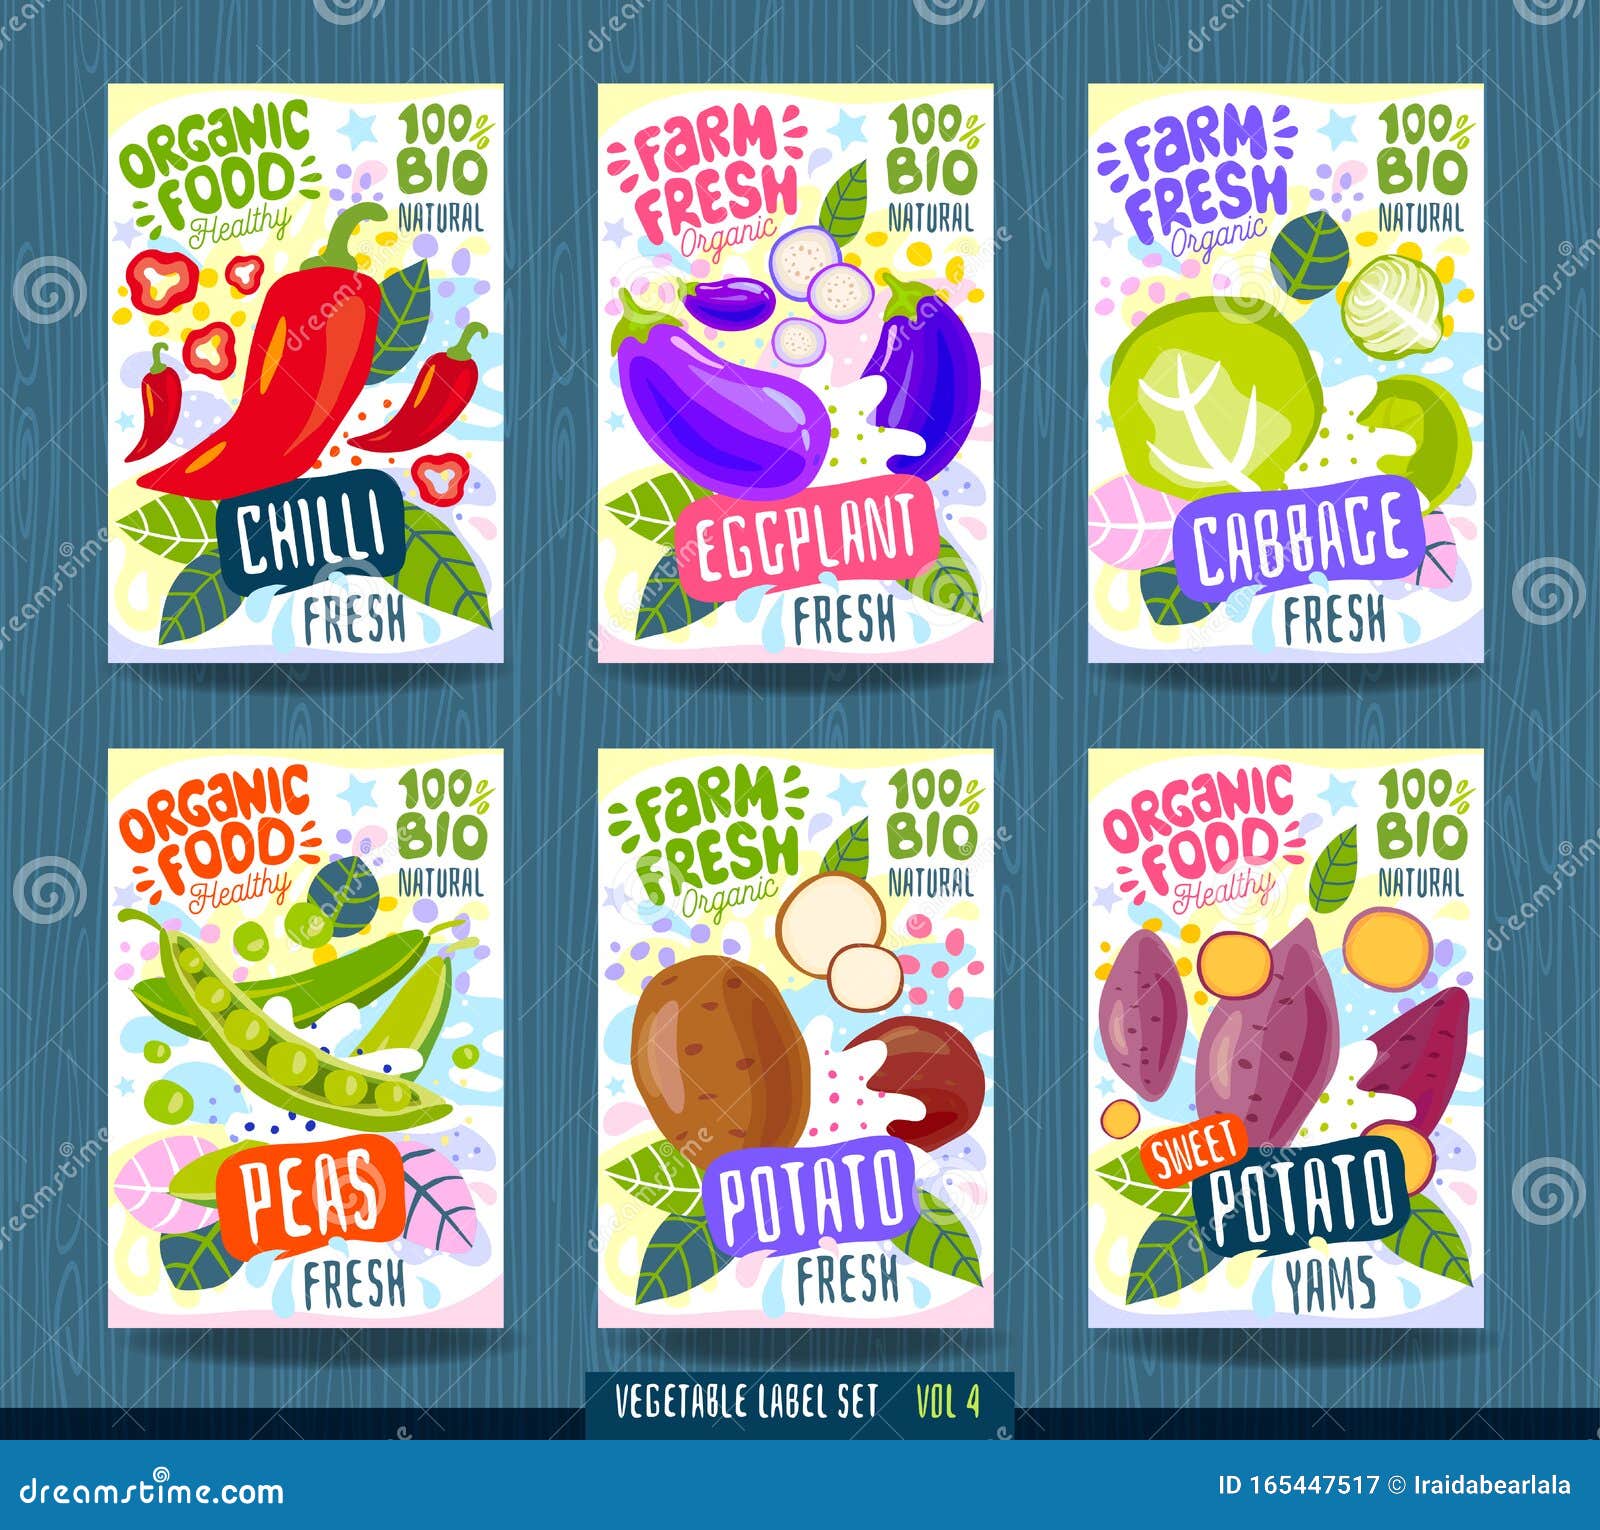 Download Abstract Splash Food Label Template. Vegetables, Fruits, Spices, Package Design. Chilli Pepper ...